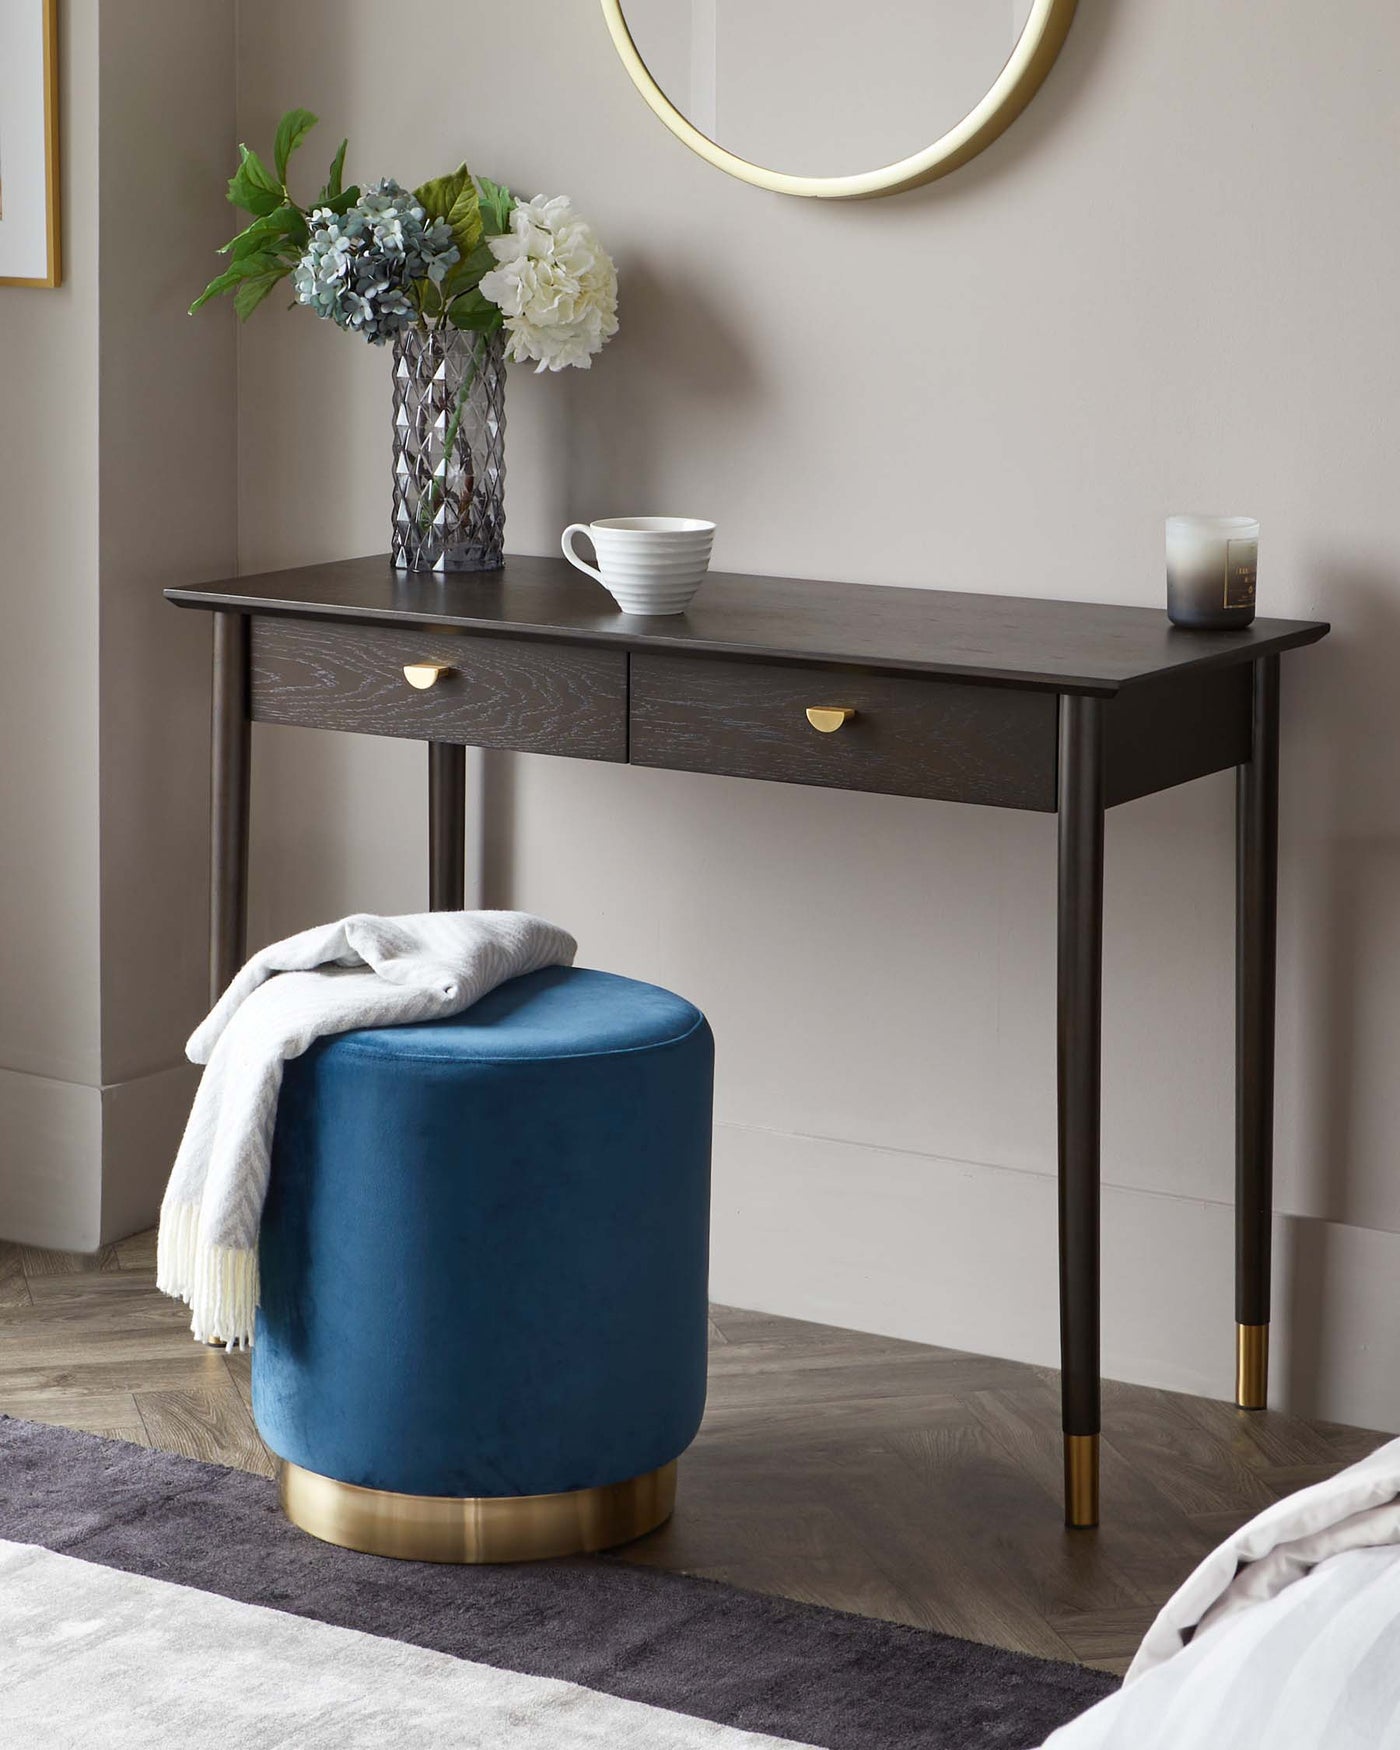 A dark wood console table with two drawers, featuring tapered legs with gold-toned tips, accented by brass half-moon drawer pulls. Paired with the table is a round blue velvet ottoman with a gold-toned metallic base, adding a touch of luxury to the setting.